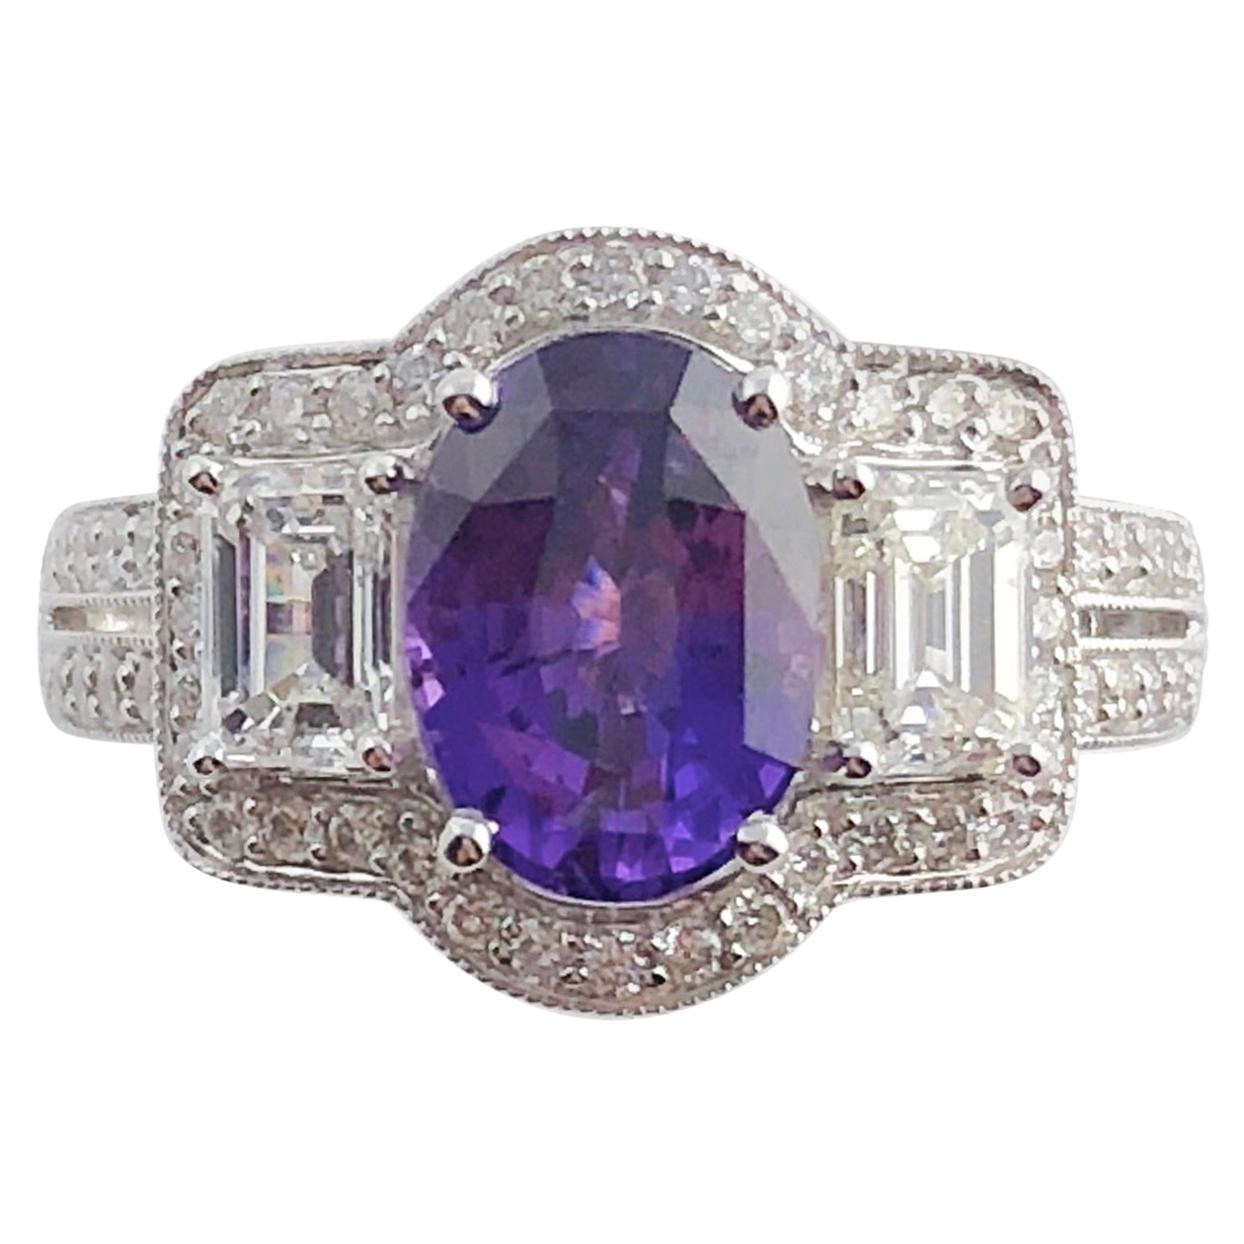 Introducing an exquisite ring featuring a GIA Certified 2.55 carat oval cut Bicolor Sapphire as its captivating centerpiece. This unique sapphire exhibits a mesmerizing change of color, transitioning from violet to purple under varying lighting